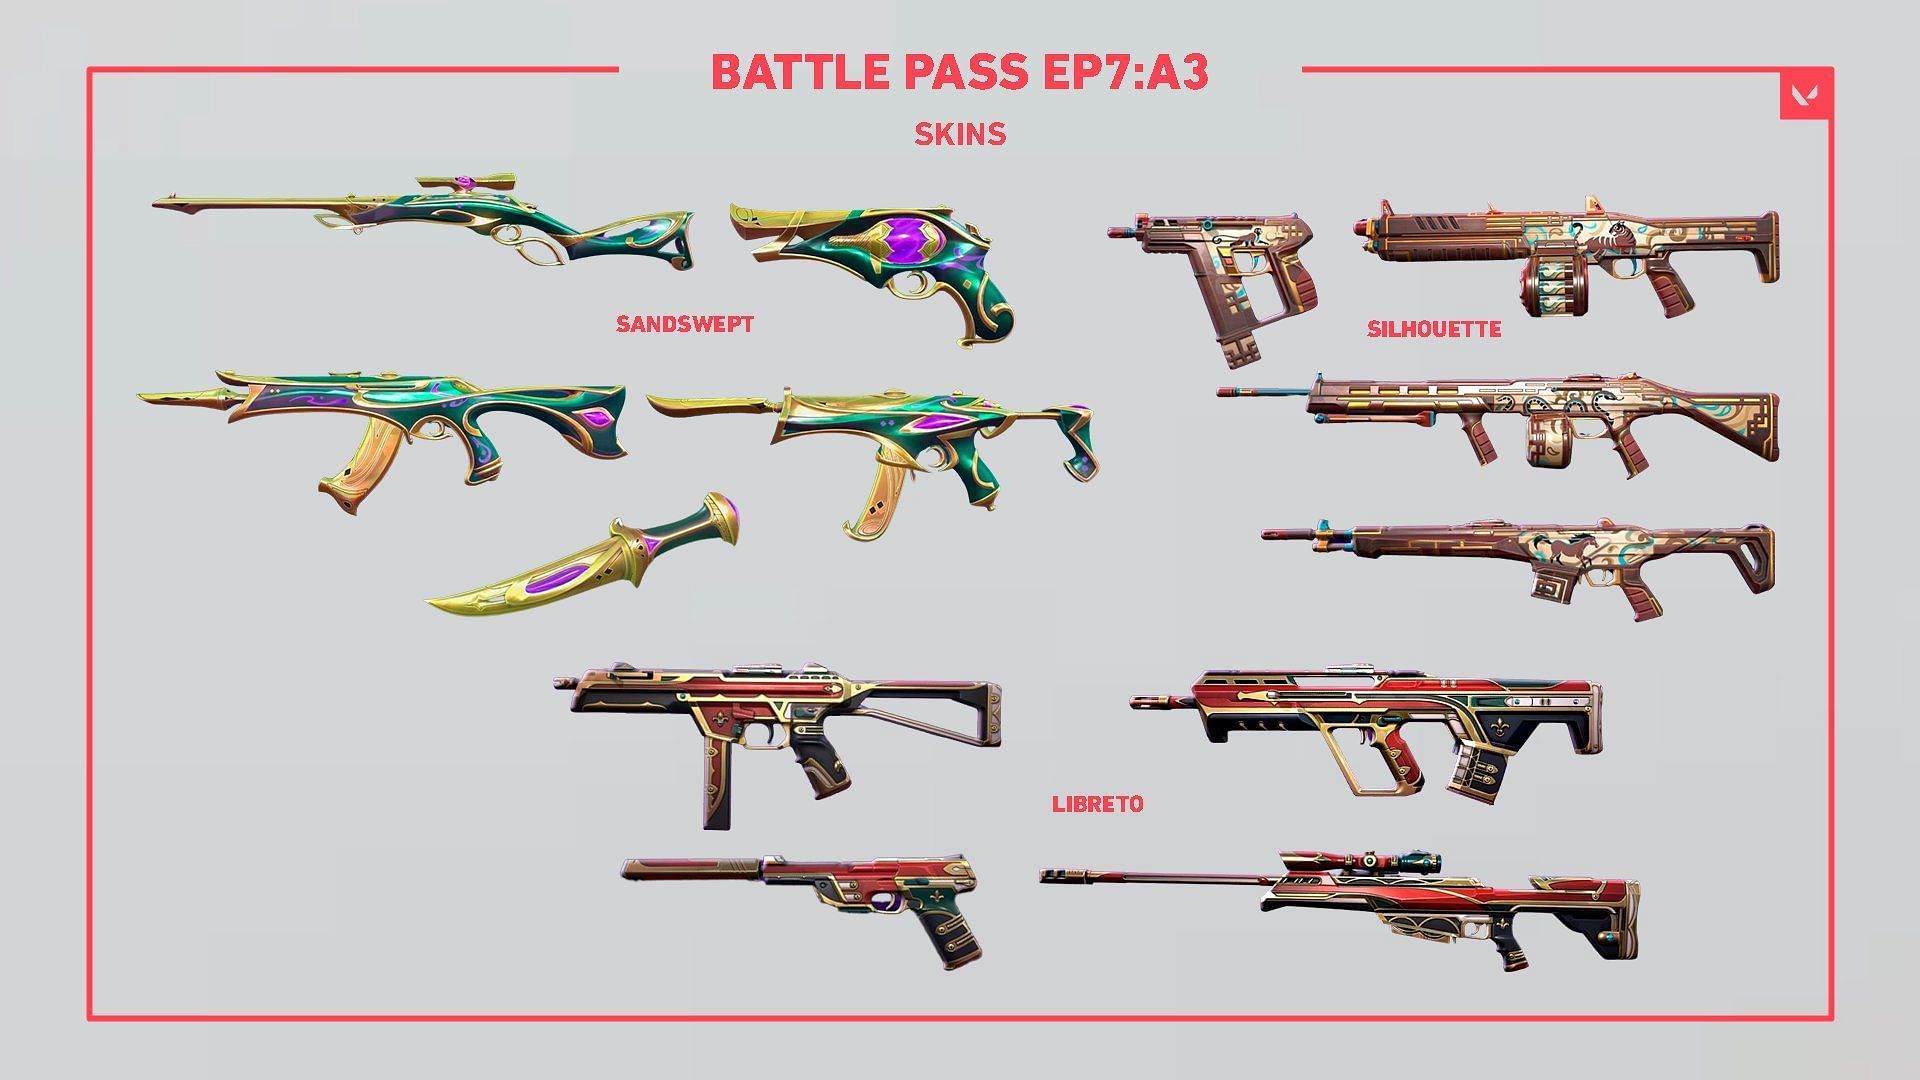 Weapon skins in Episode 7 Act 3 Battlepass (Image via Riot Games)